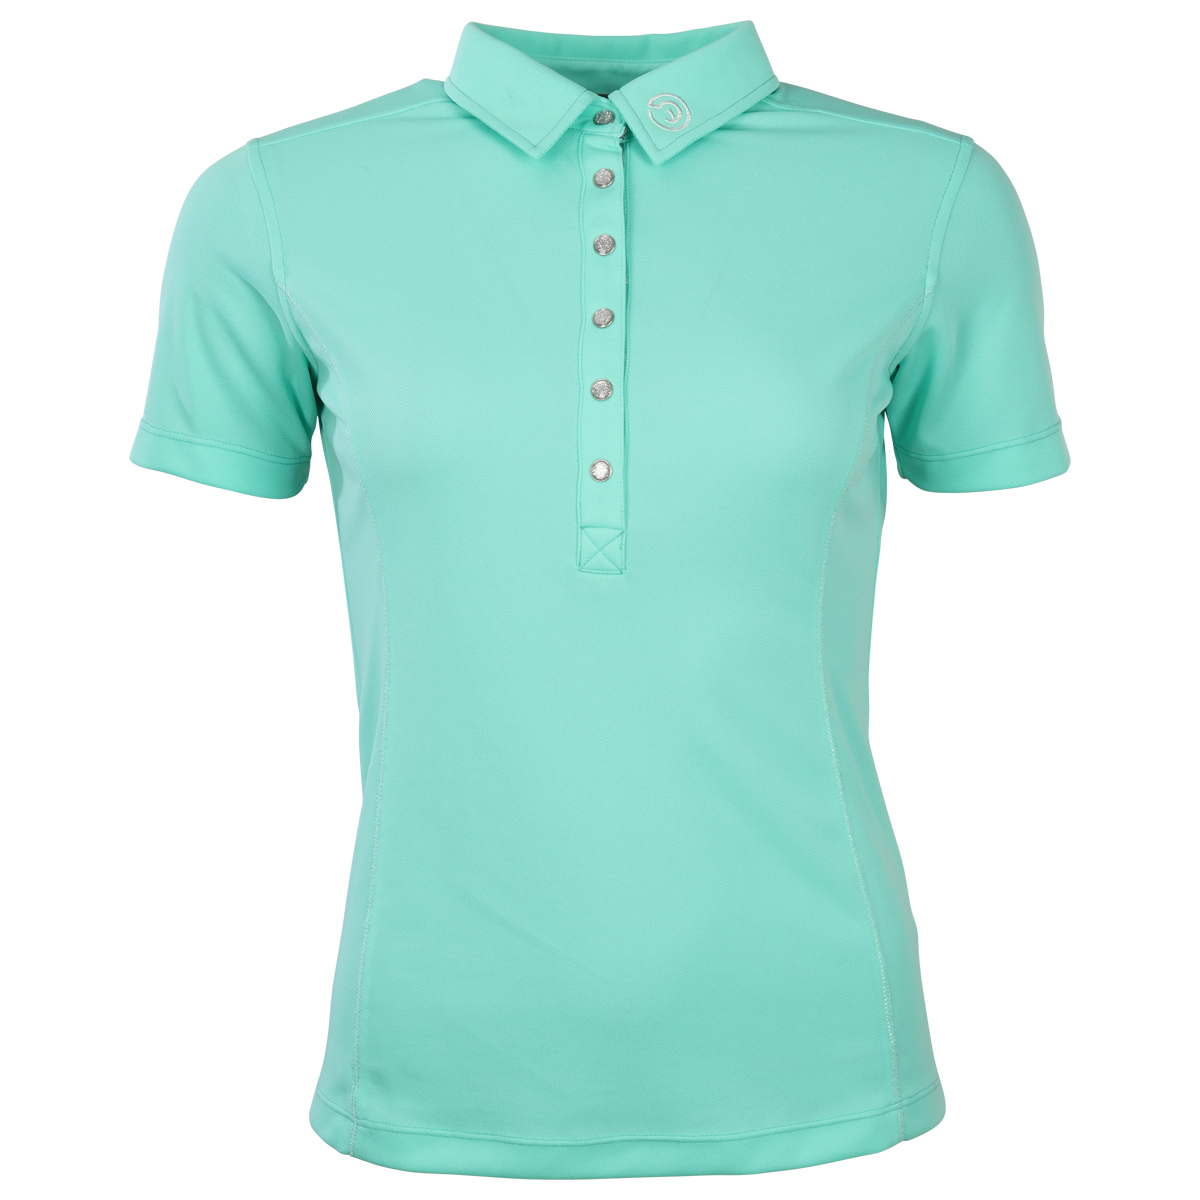 Polo Anky Essential Turquoise, XXS in turquoise